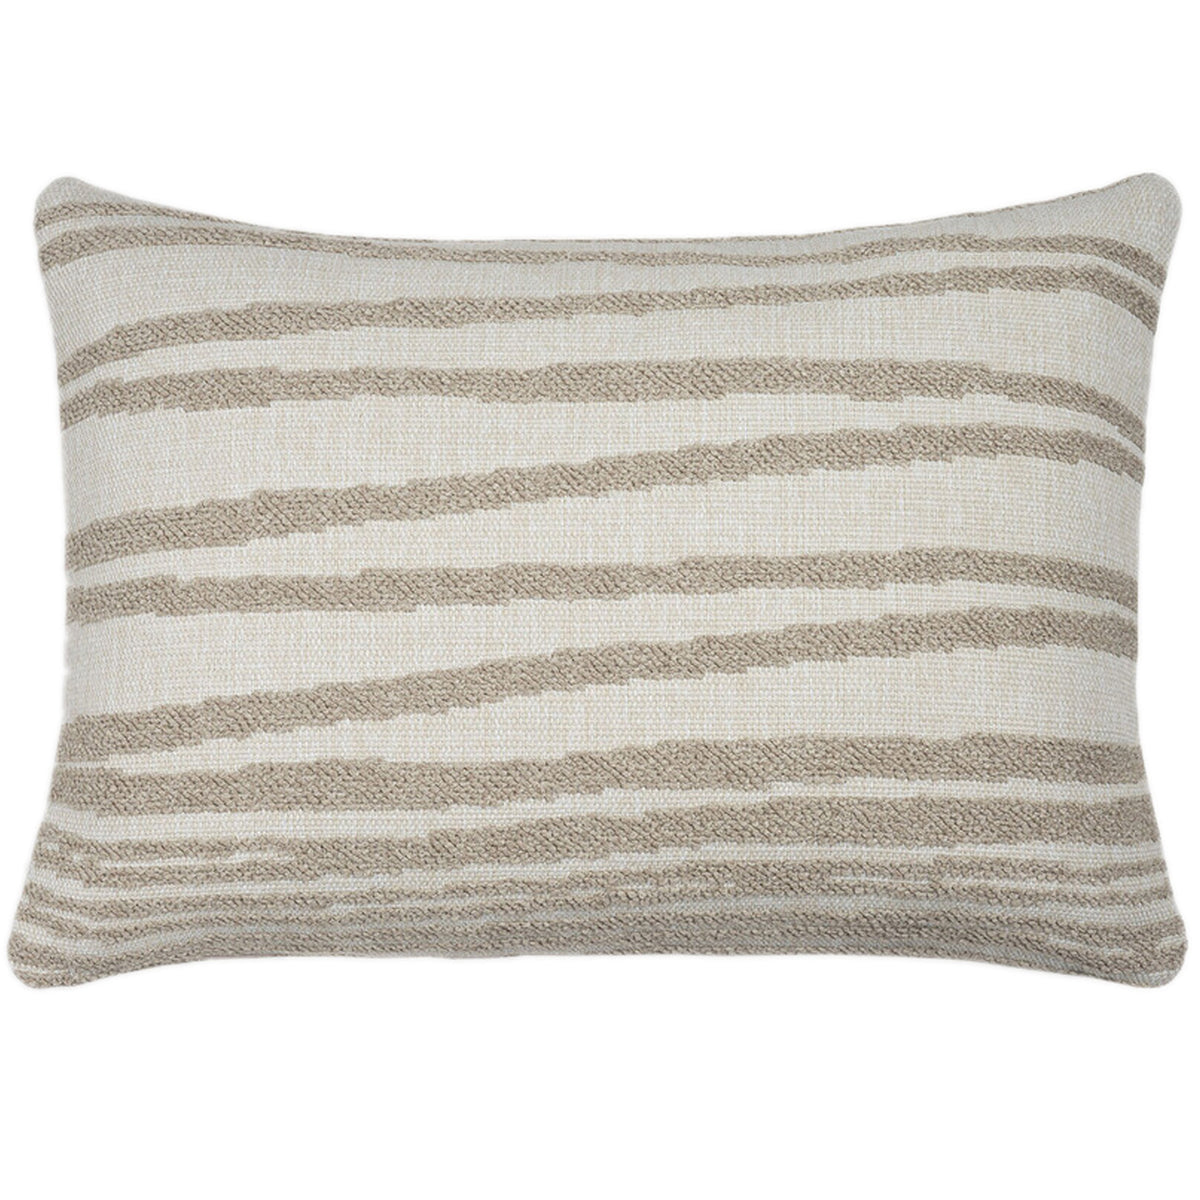 Stripes Outdoor Cushion, Set of 2